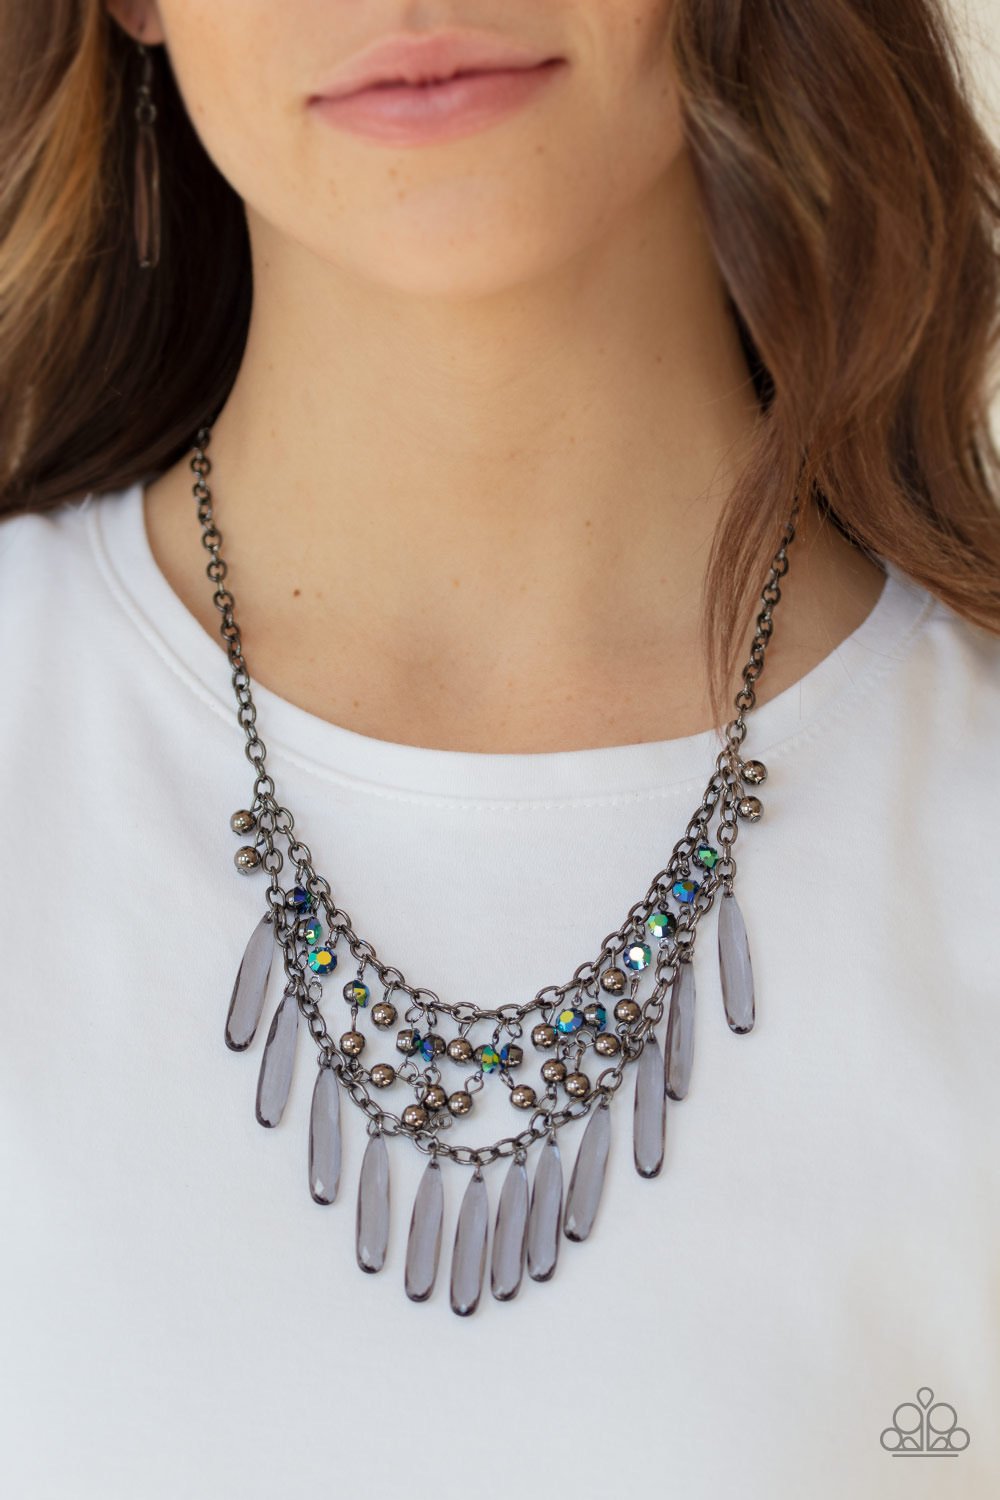 Way To Make An Entrance - Multi Necklace – Erin's $5 Splurge